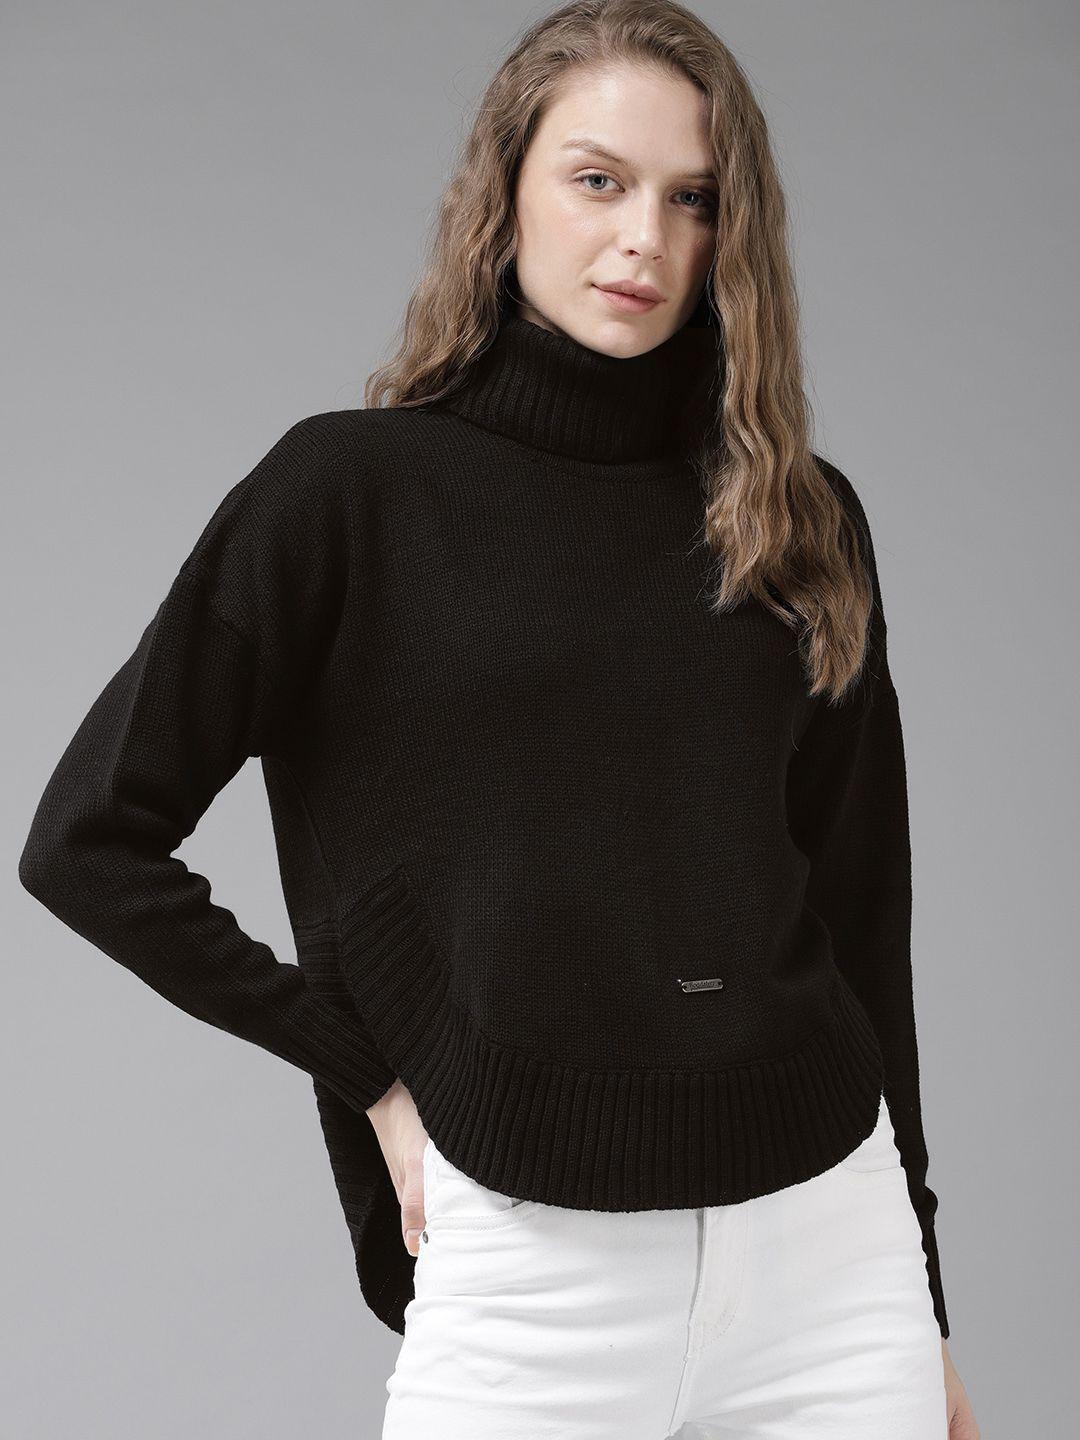 the roadster lifestyle co women black solid sweater